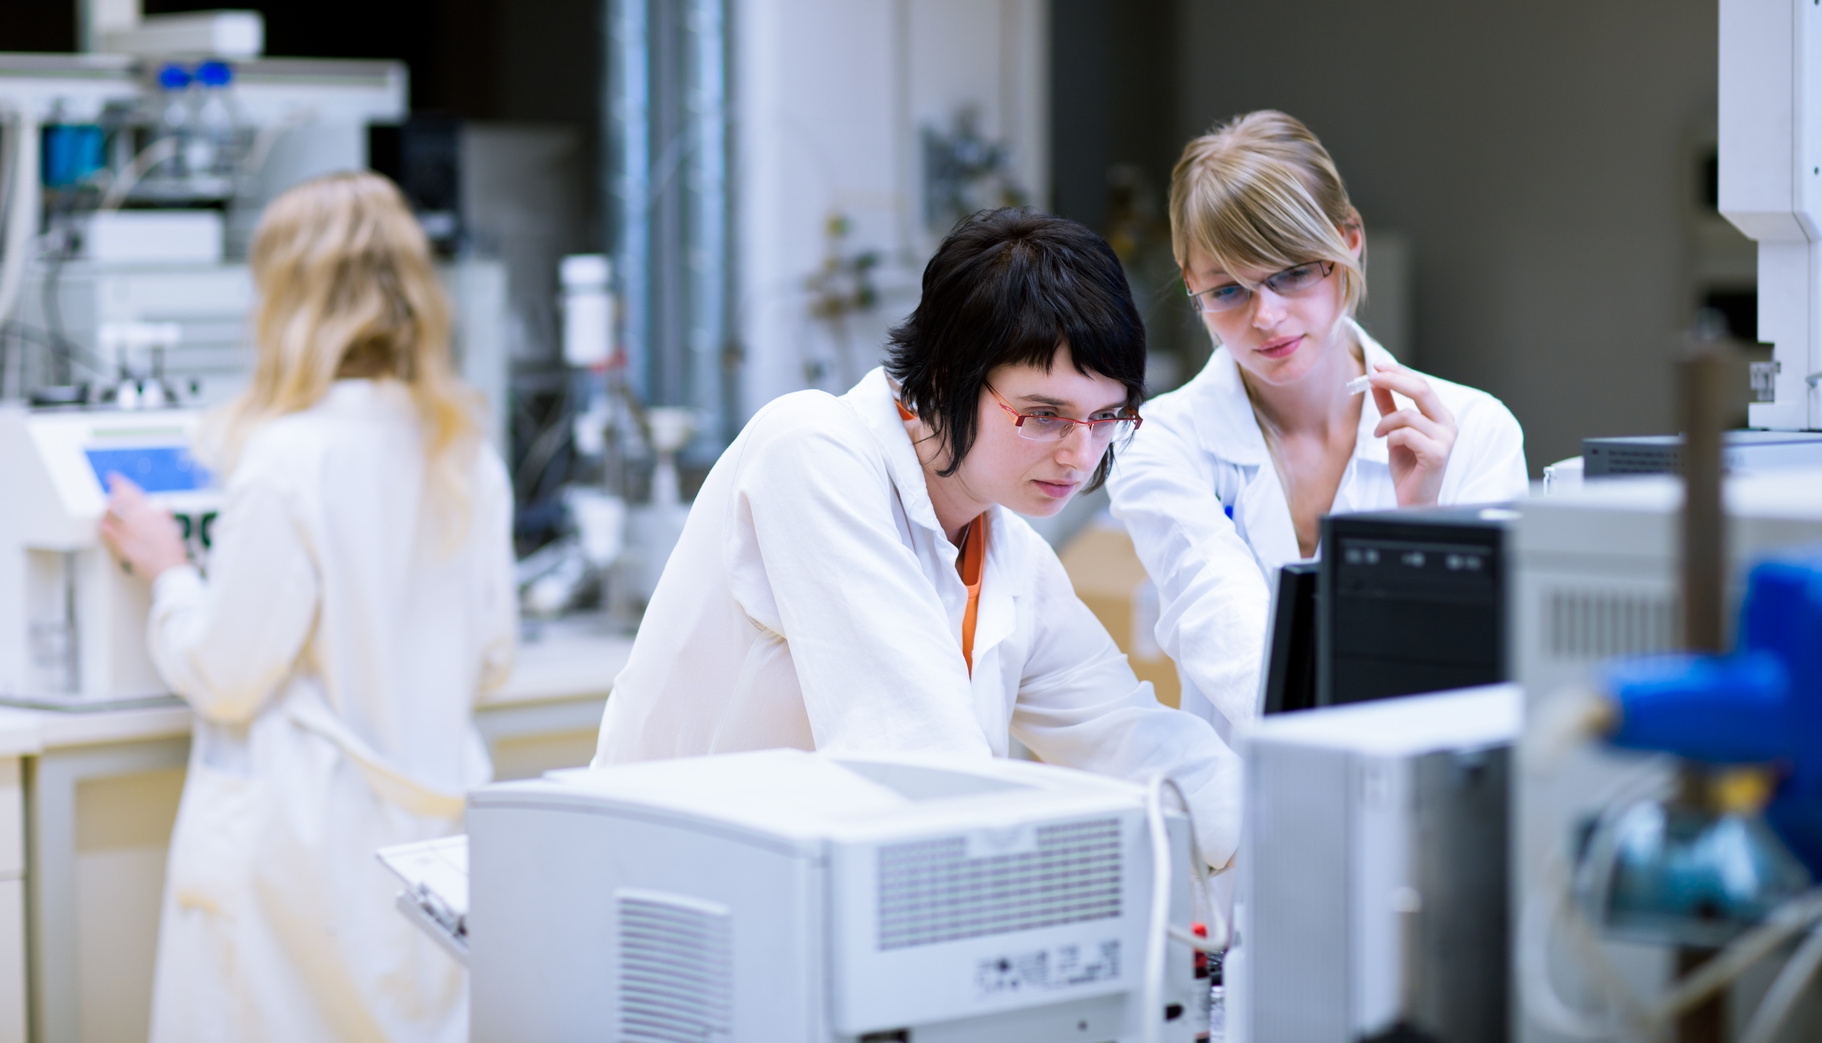 two female researchers/chemistry students doing research in a chemistry lab (color toned image; shallow DOF)